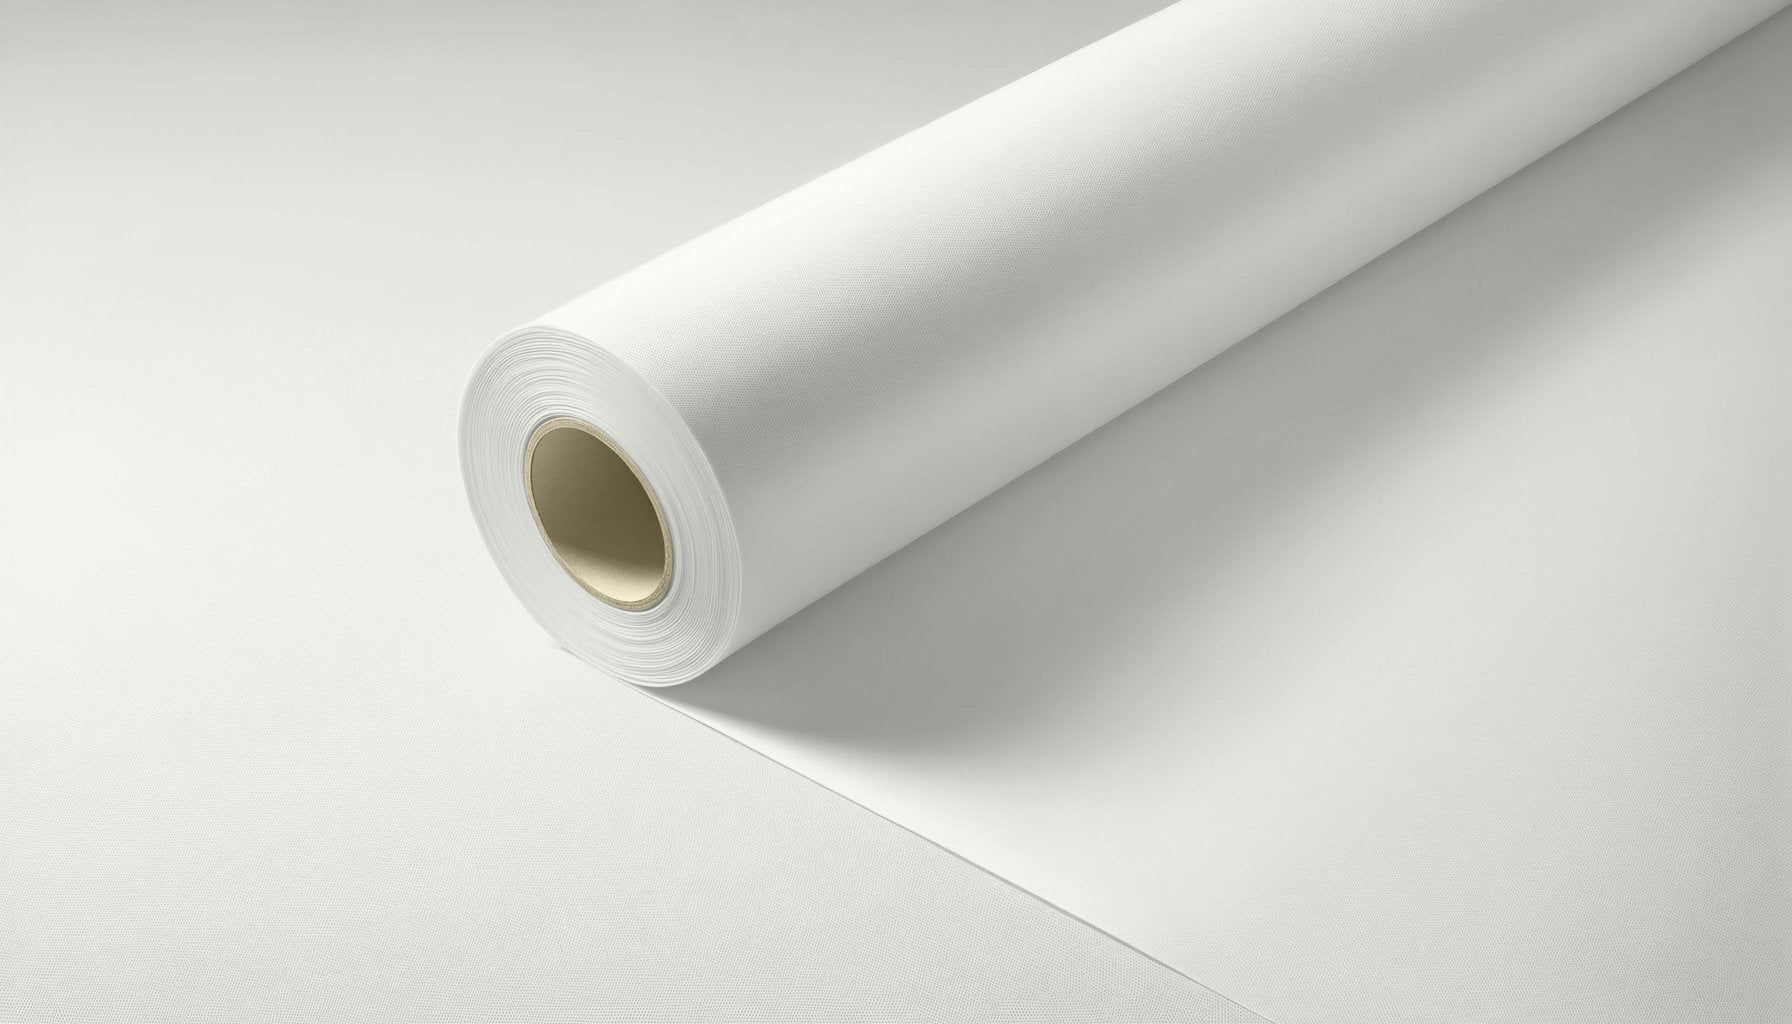 Peel & Stick Removable Re-usable Paint - Color RAL 9003 Signal White - offRAL™ - RALRAW LLC, USA